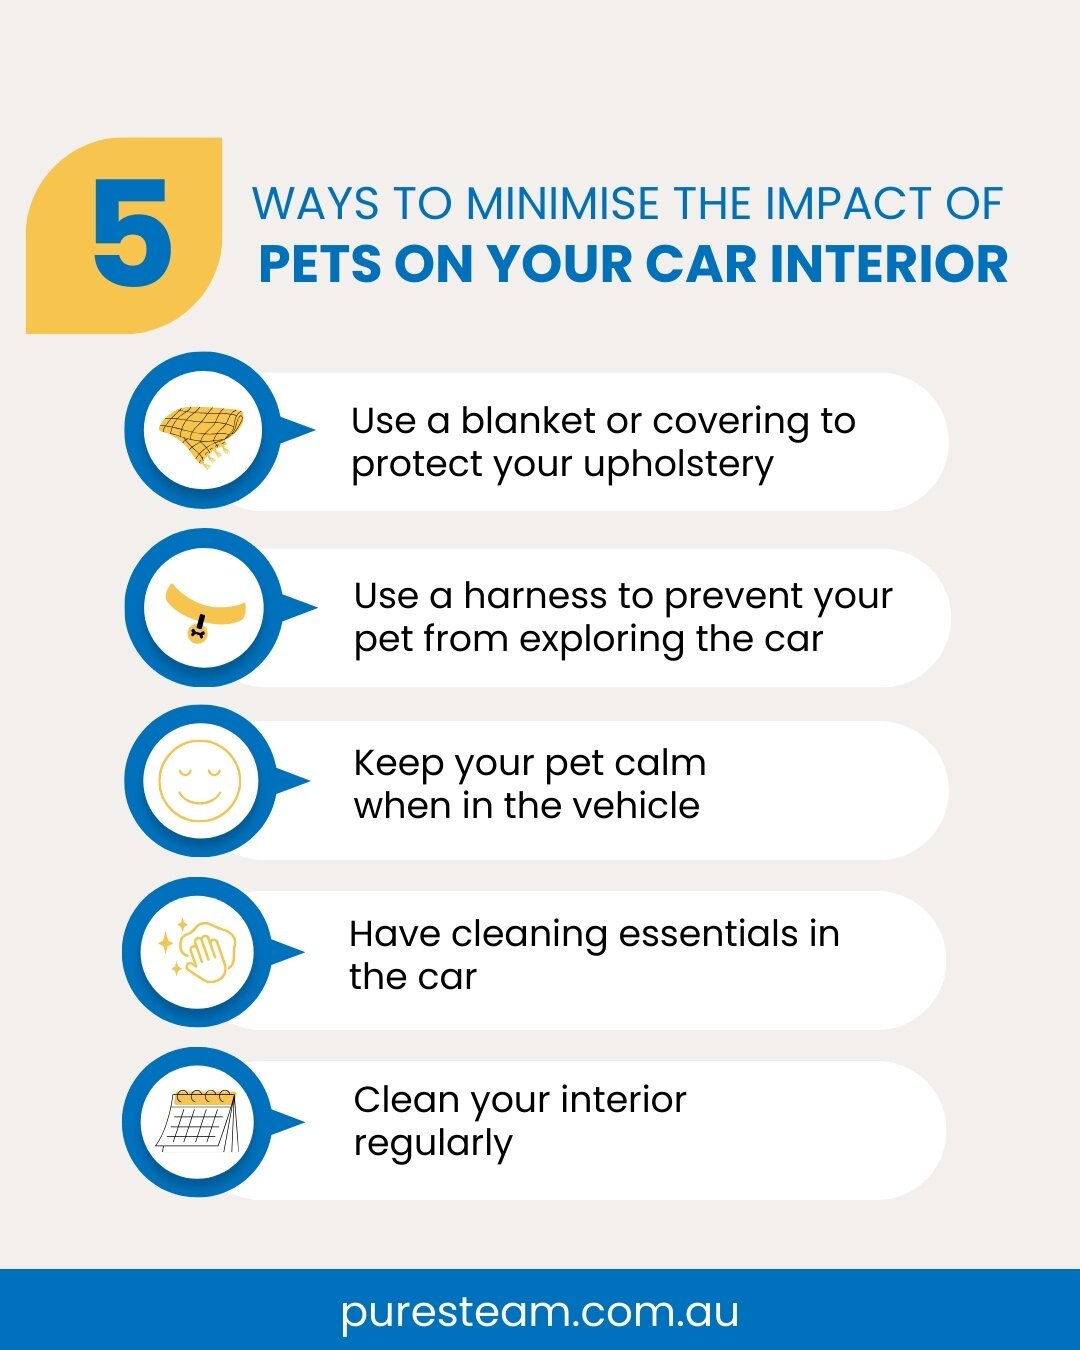 🐕 Check out our 5 ways to minimise the impacts pets can have on your car interior!⁠
⁠
Our beloved furry companions cause some wear, tear and odours on our car interiors. 🐾⁠
⁠
Follow these 5 tips and don't forget I'm always here for that deep cleans